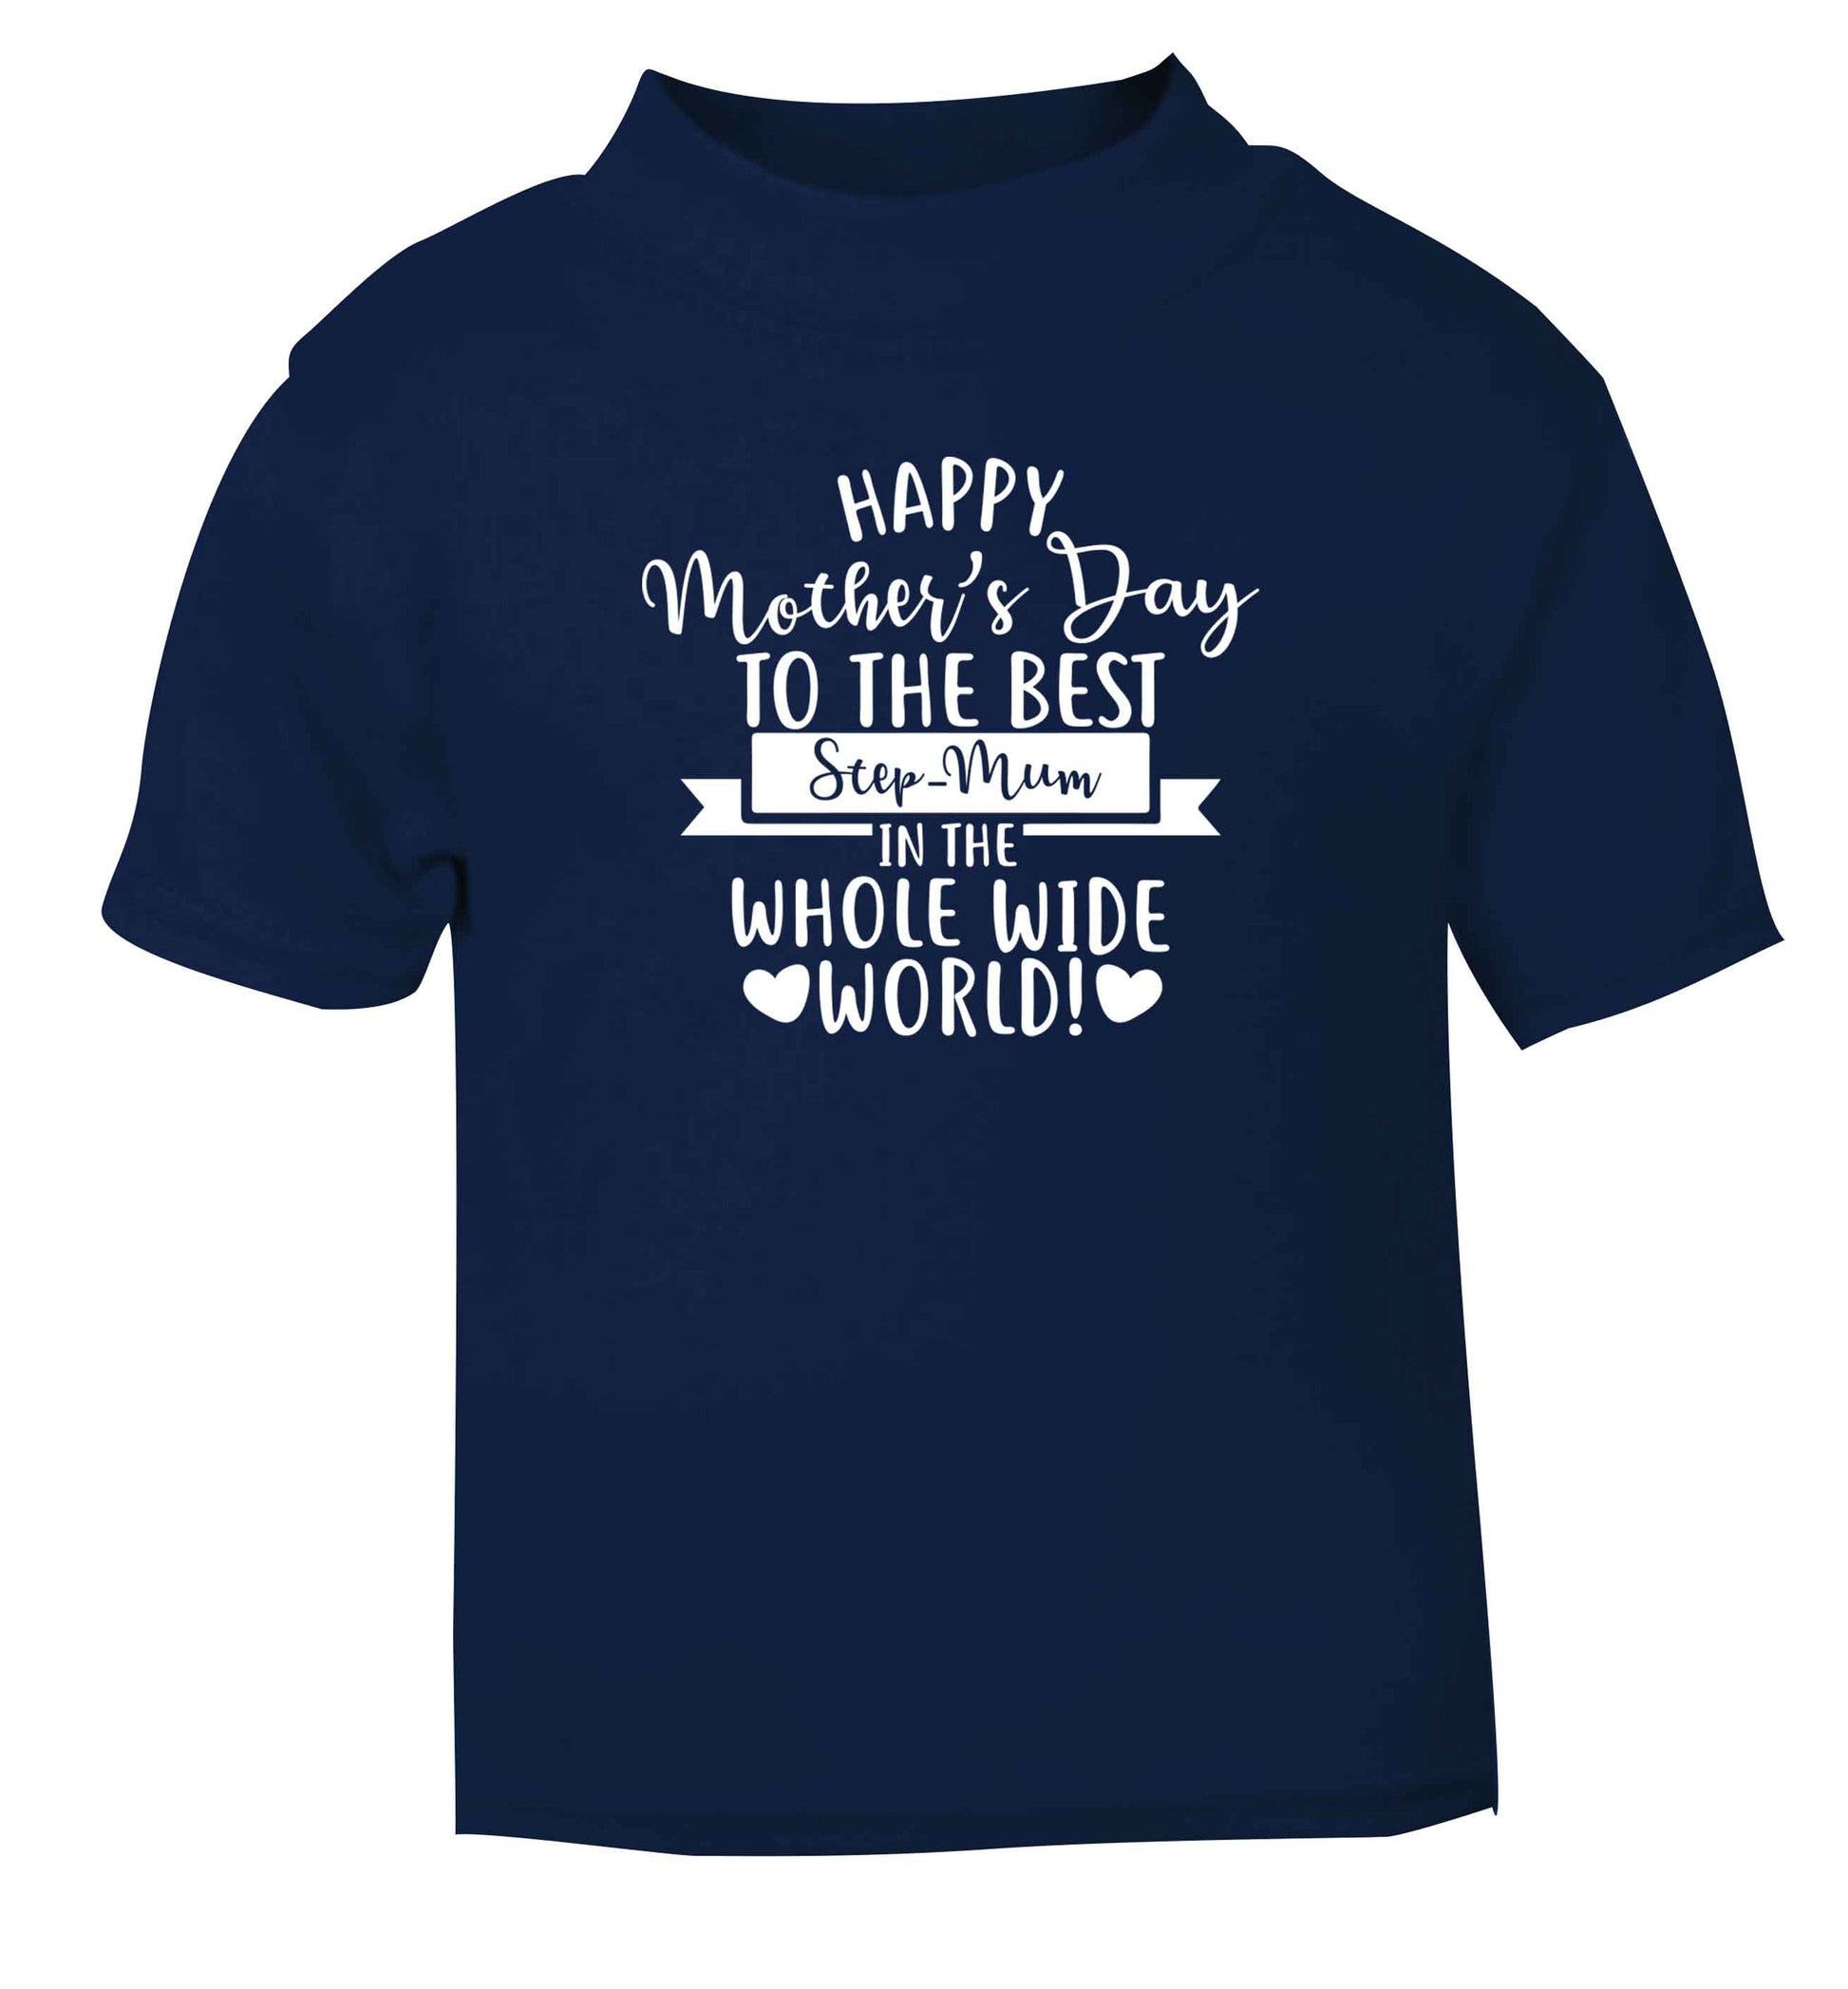 Happy mother's day to the best step-mum in the world navy baby toddler Tshirt 2 Years